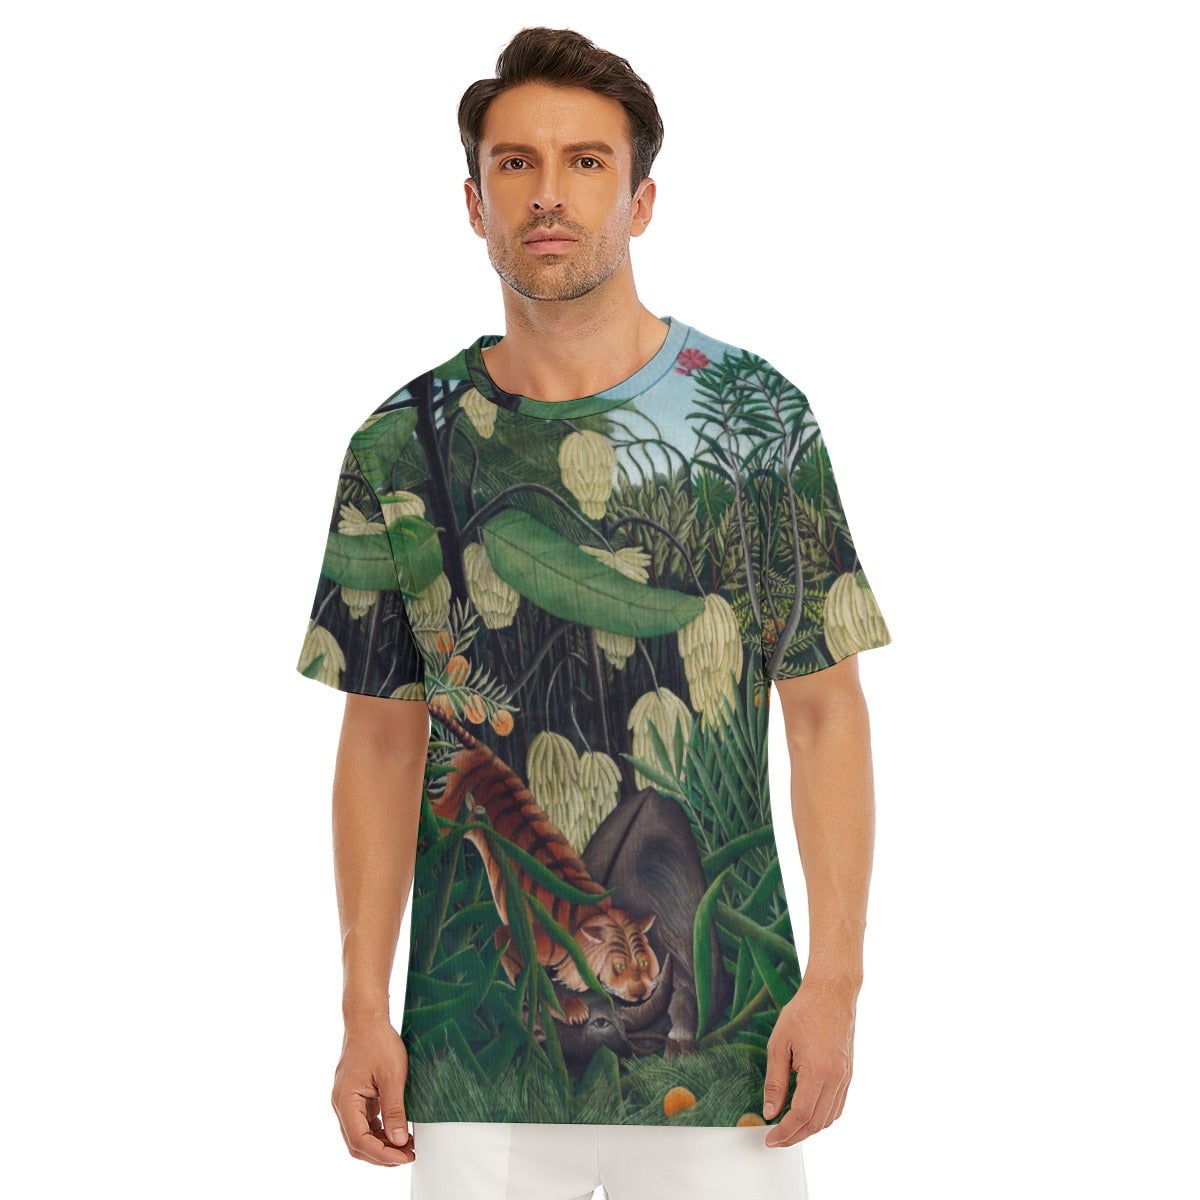 Henri Rousseau’s Fight Between a Tiger and a Buffalo T-Shirt